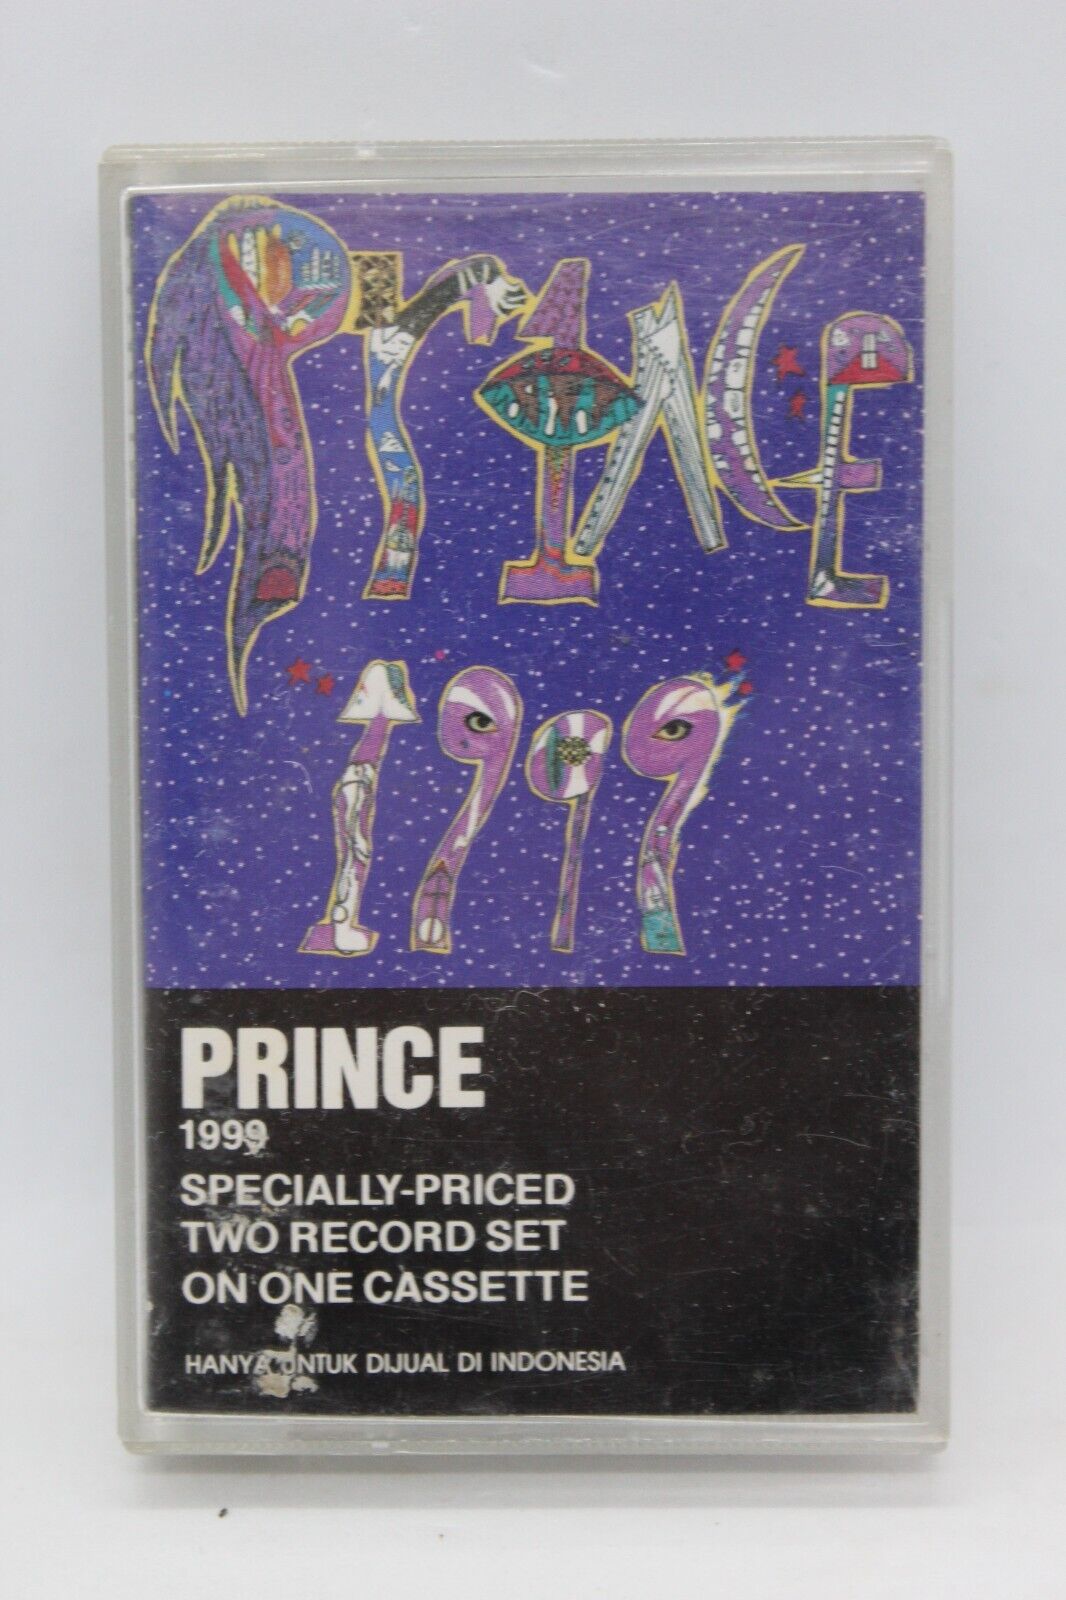 VINTAGE PRINCE 1999 MUSIC CASSETTE - VERY RARE INDONESIAN PRESSING